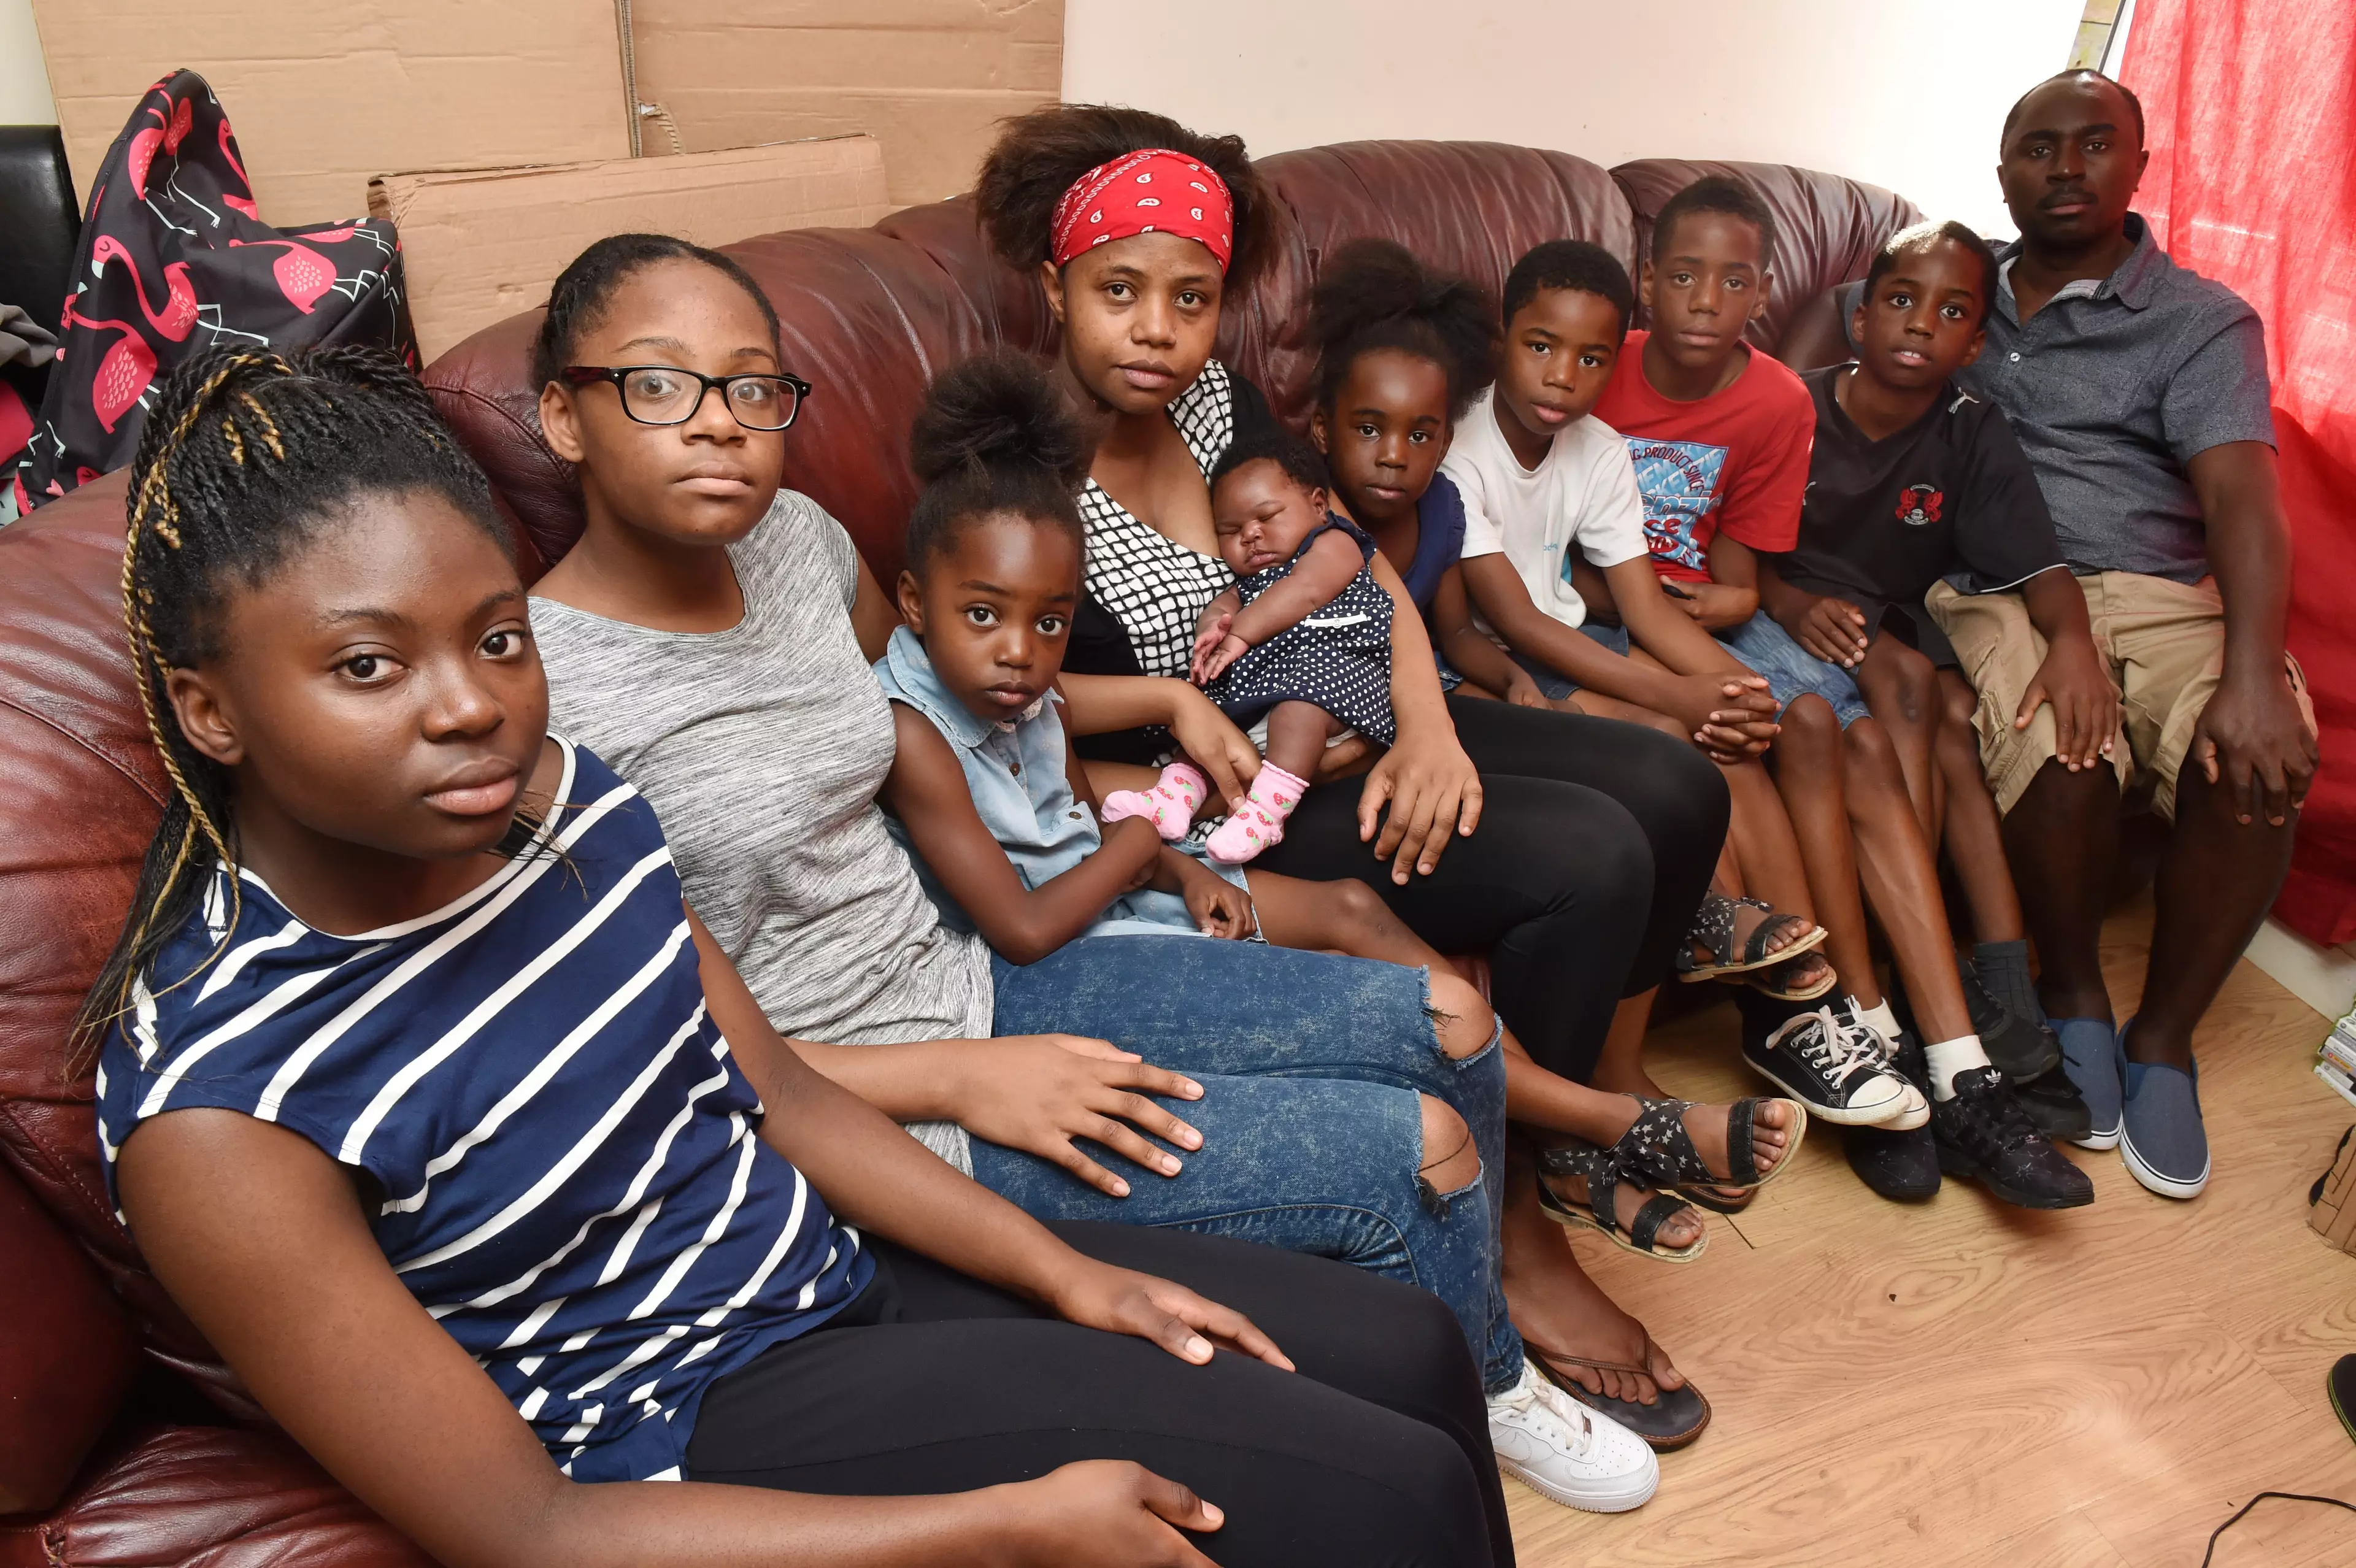 Man With Eight Kids Gets A Sick House And People Are Furious